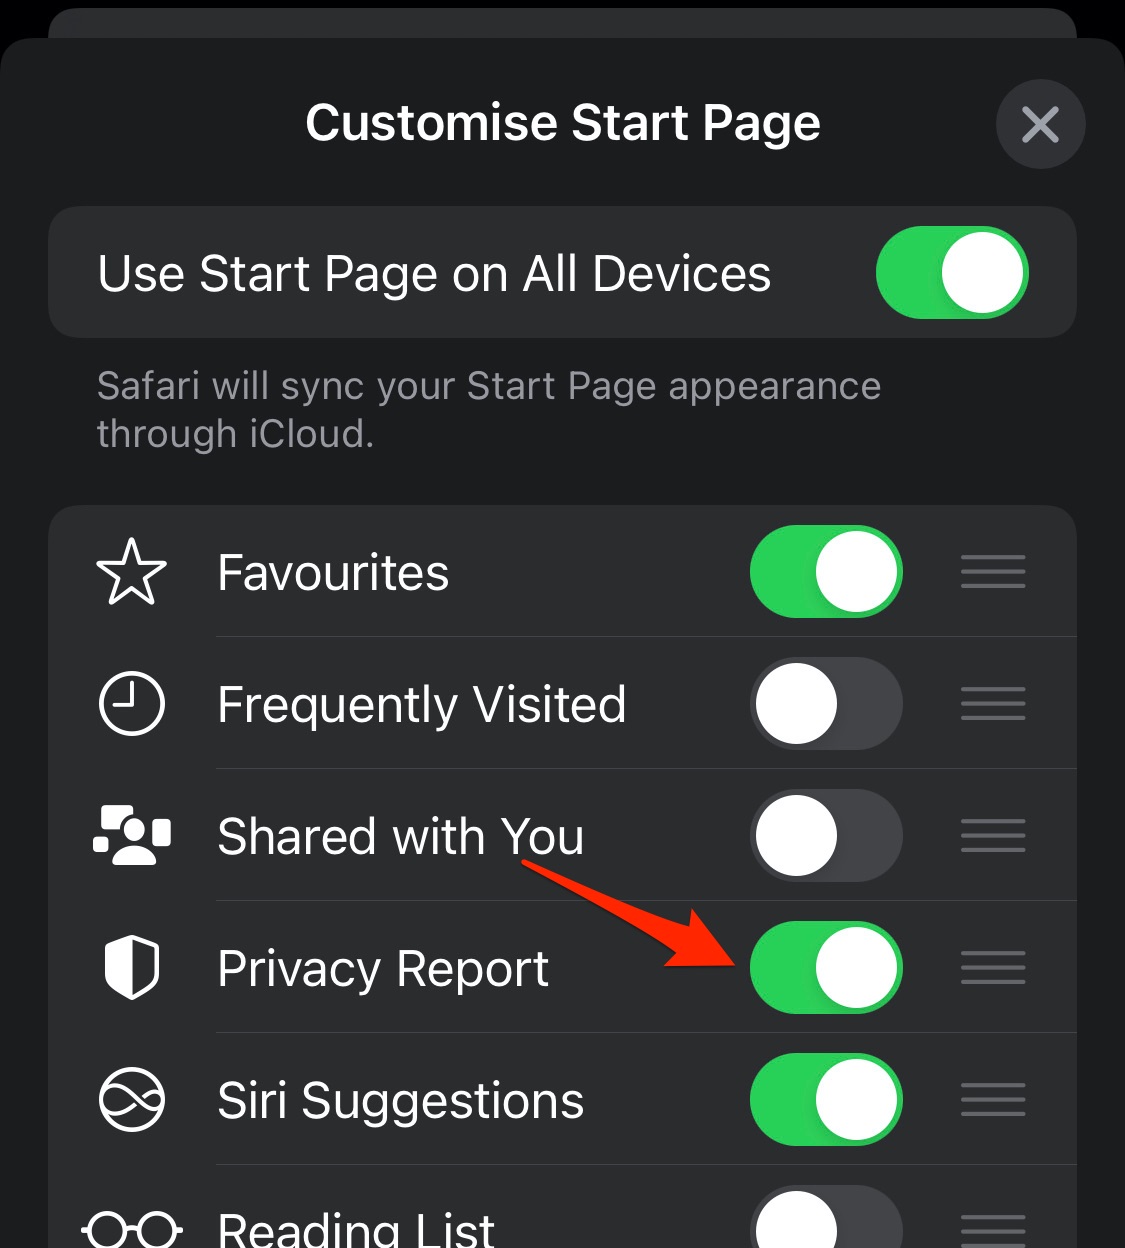 Safari iOS Customize Start Page options with Privacy Report